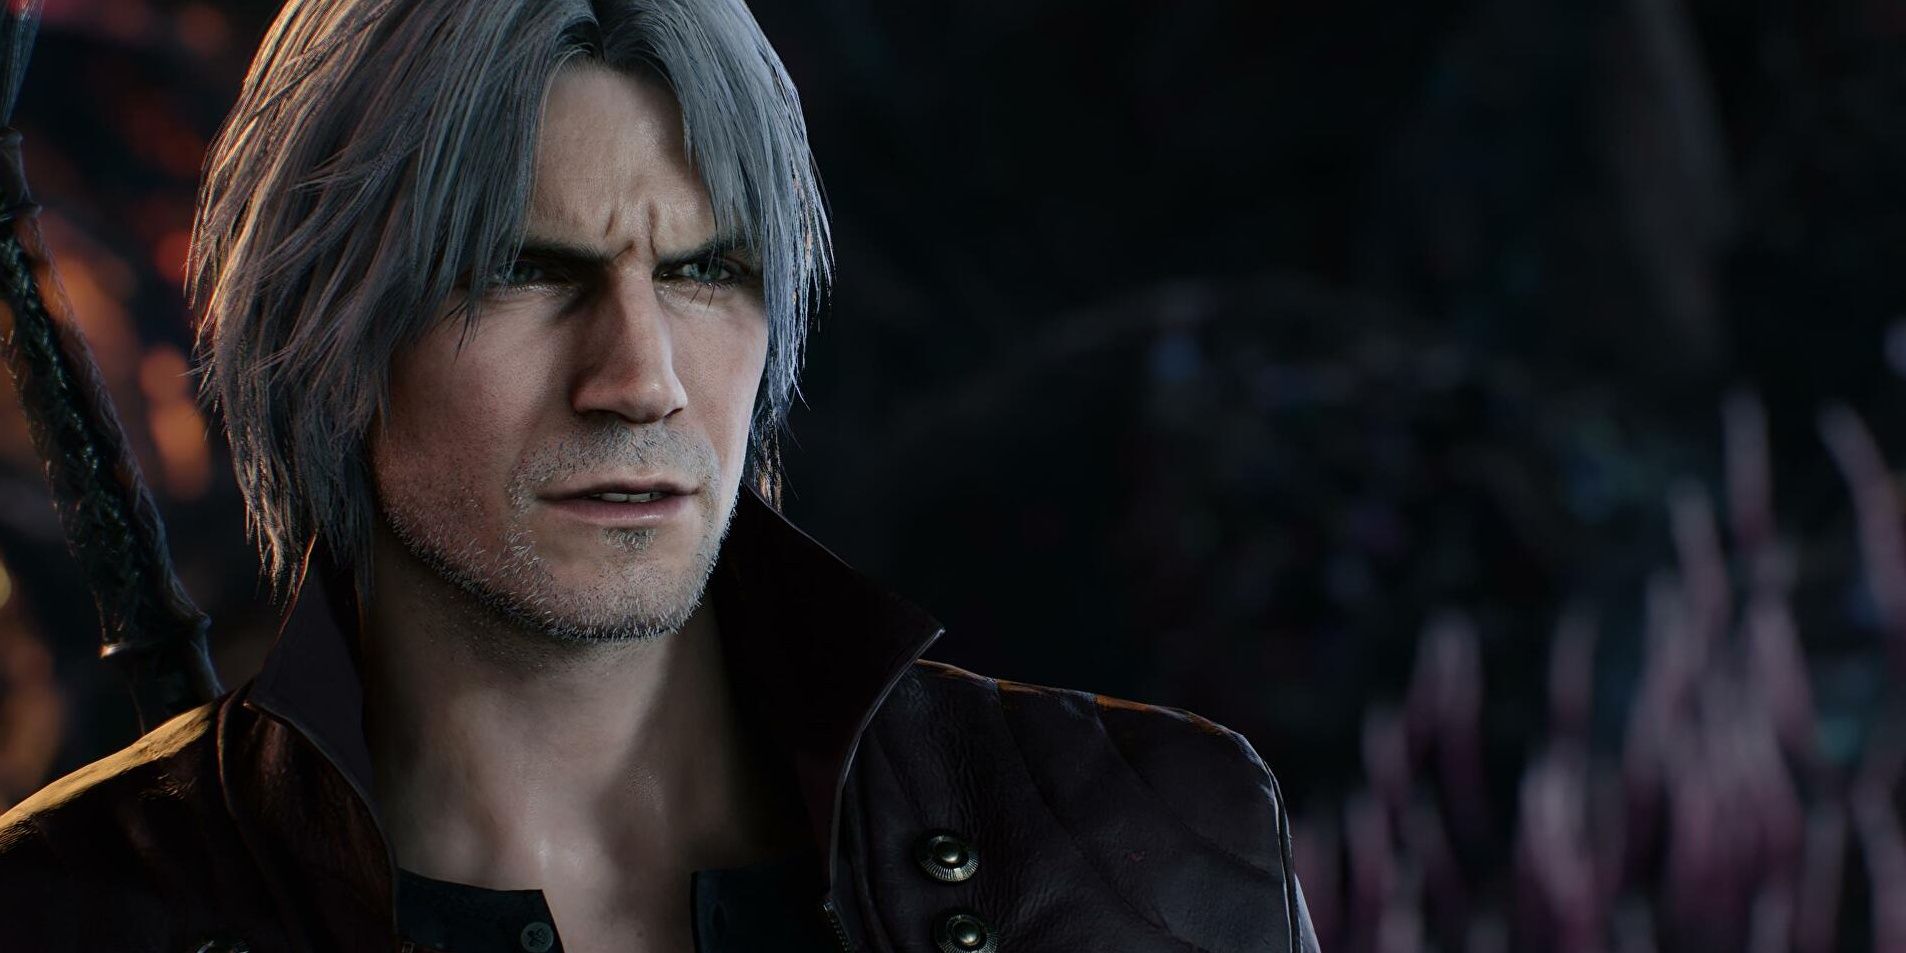 Dante observes in Devil May Cry 5